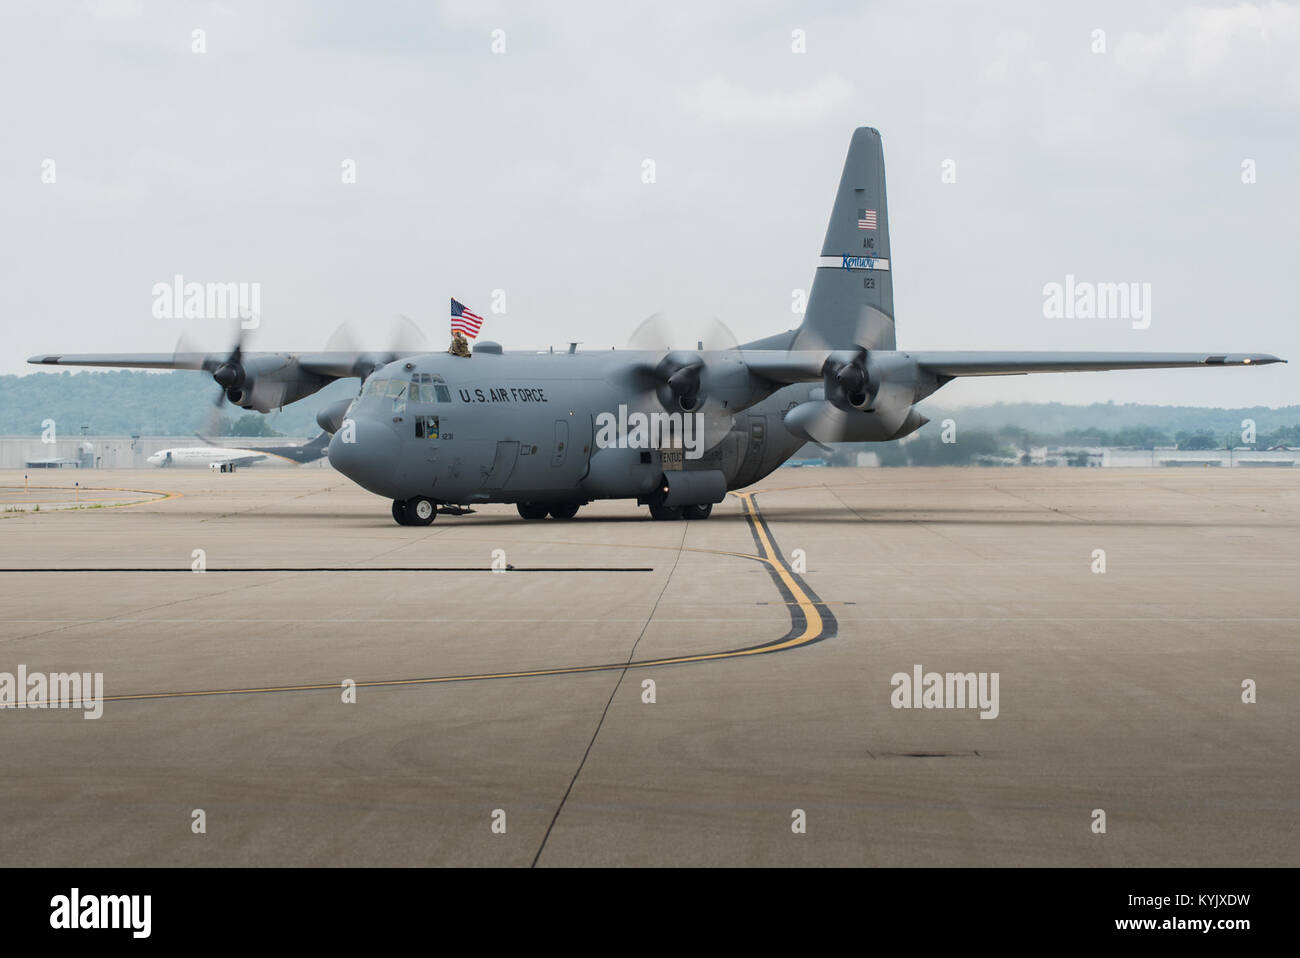 A C-130 Hercules aircraft taxies onto the flight line at the Kentucky Air National Guard Base in Louisville, Ky., July 4, 2015, carrying 39 Airmen returning from a deployment in the Persian Gulf region. The Kentucky Air Guard's 123rd Airlift Wing has been supporting Operation Freedom's Sentinel in the U.S. Central Command Area of Responsibility since February. (U.S. Air National Guard photo by Maj. Dale Greer) Stock Photo